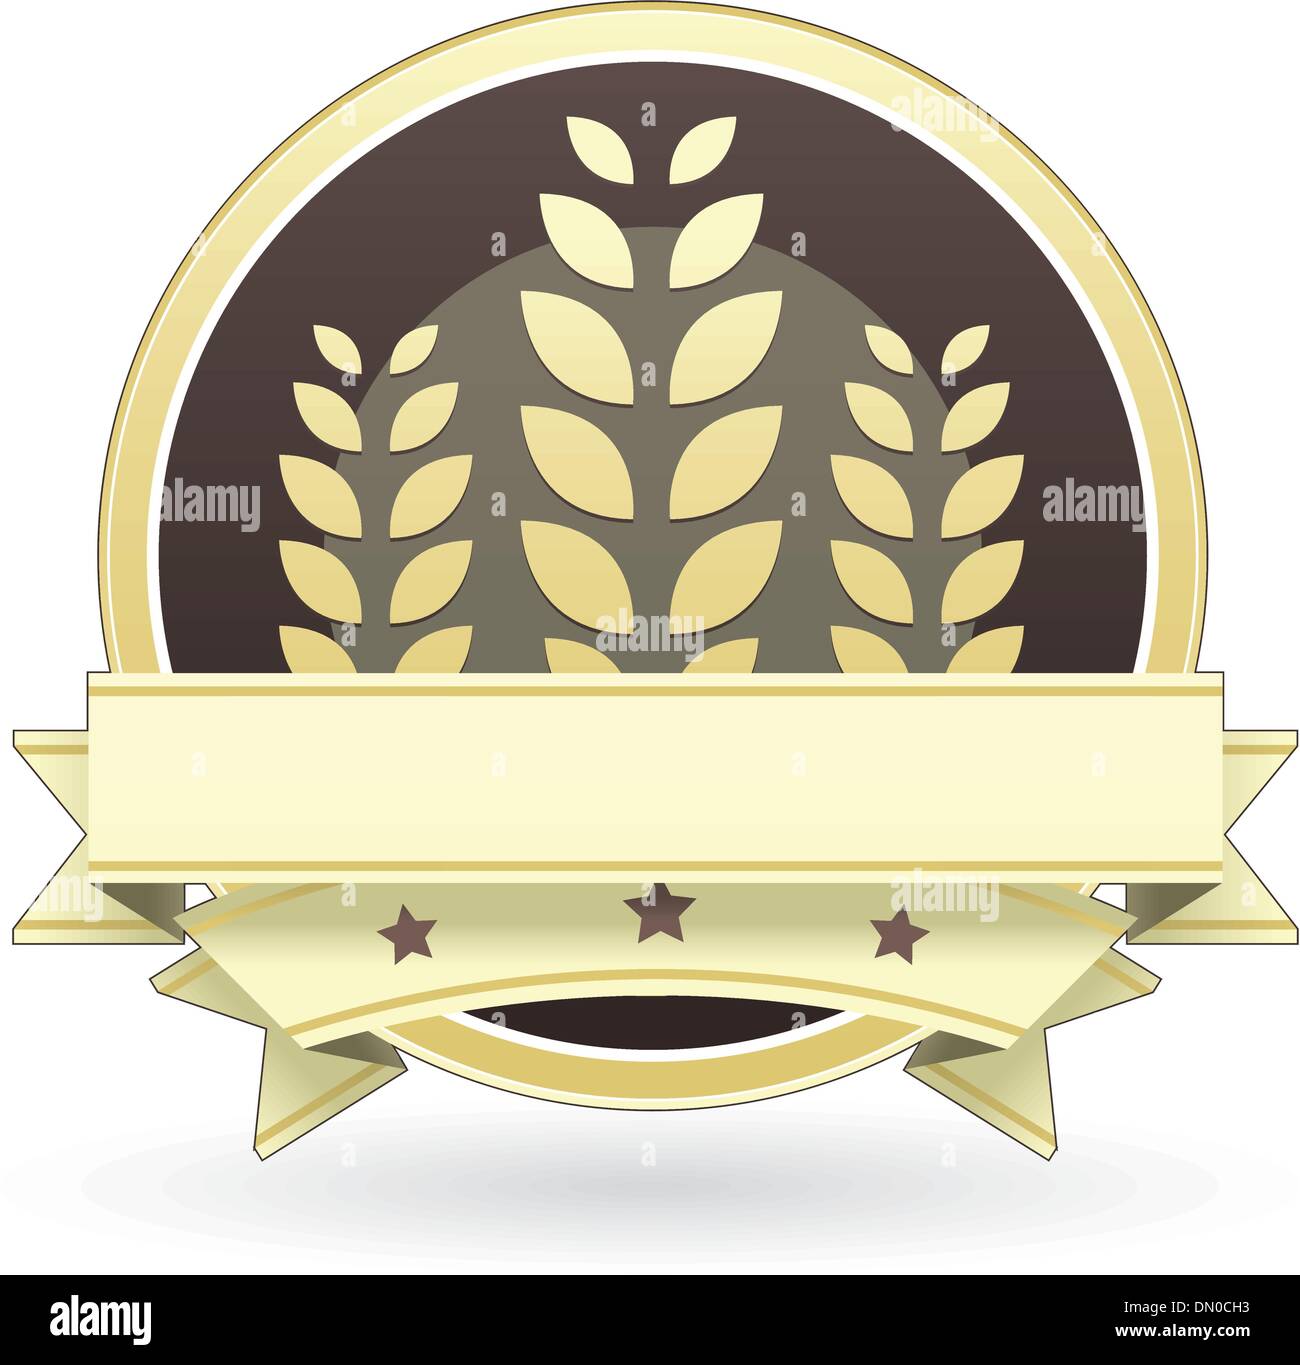 Blank grain or cereal food label Stock Vector